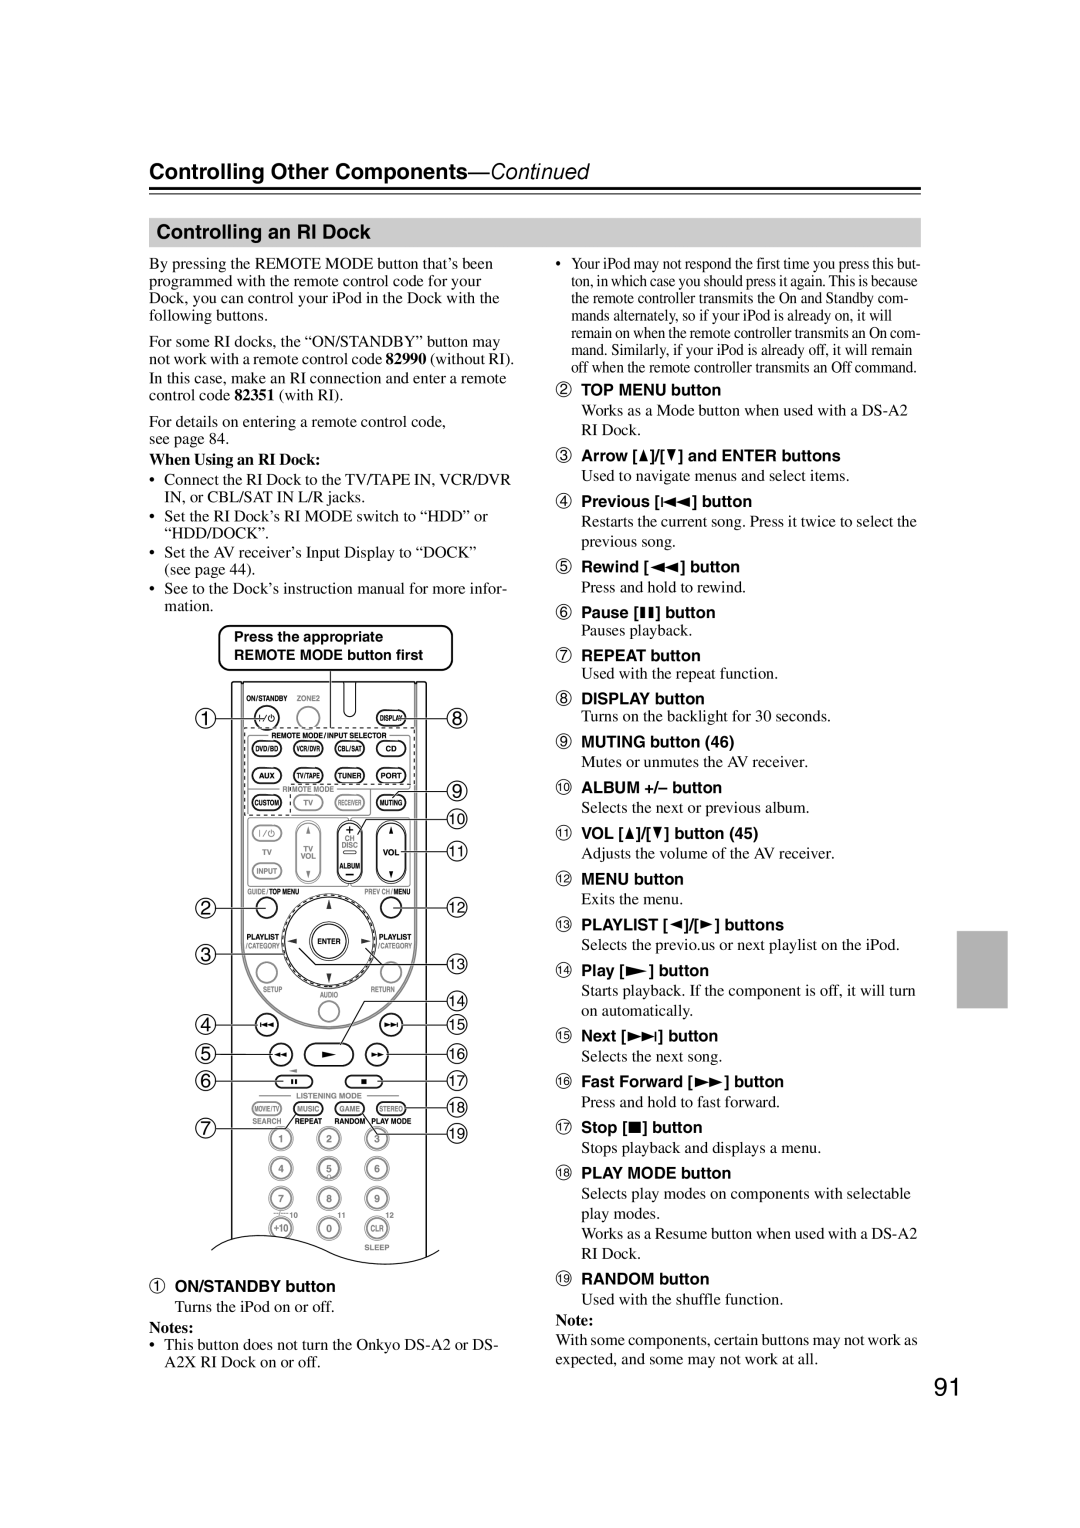 Onkyo SR507, TX-SR577 instruction manual Controlling Other Components-Continued 